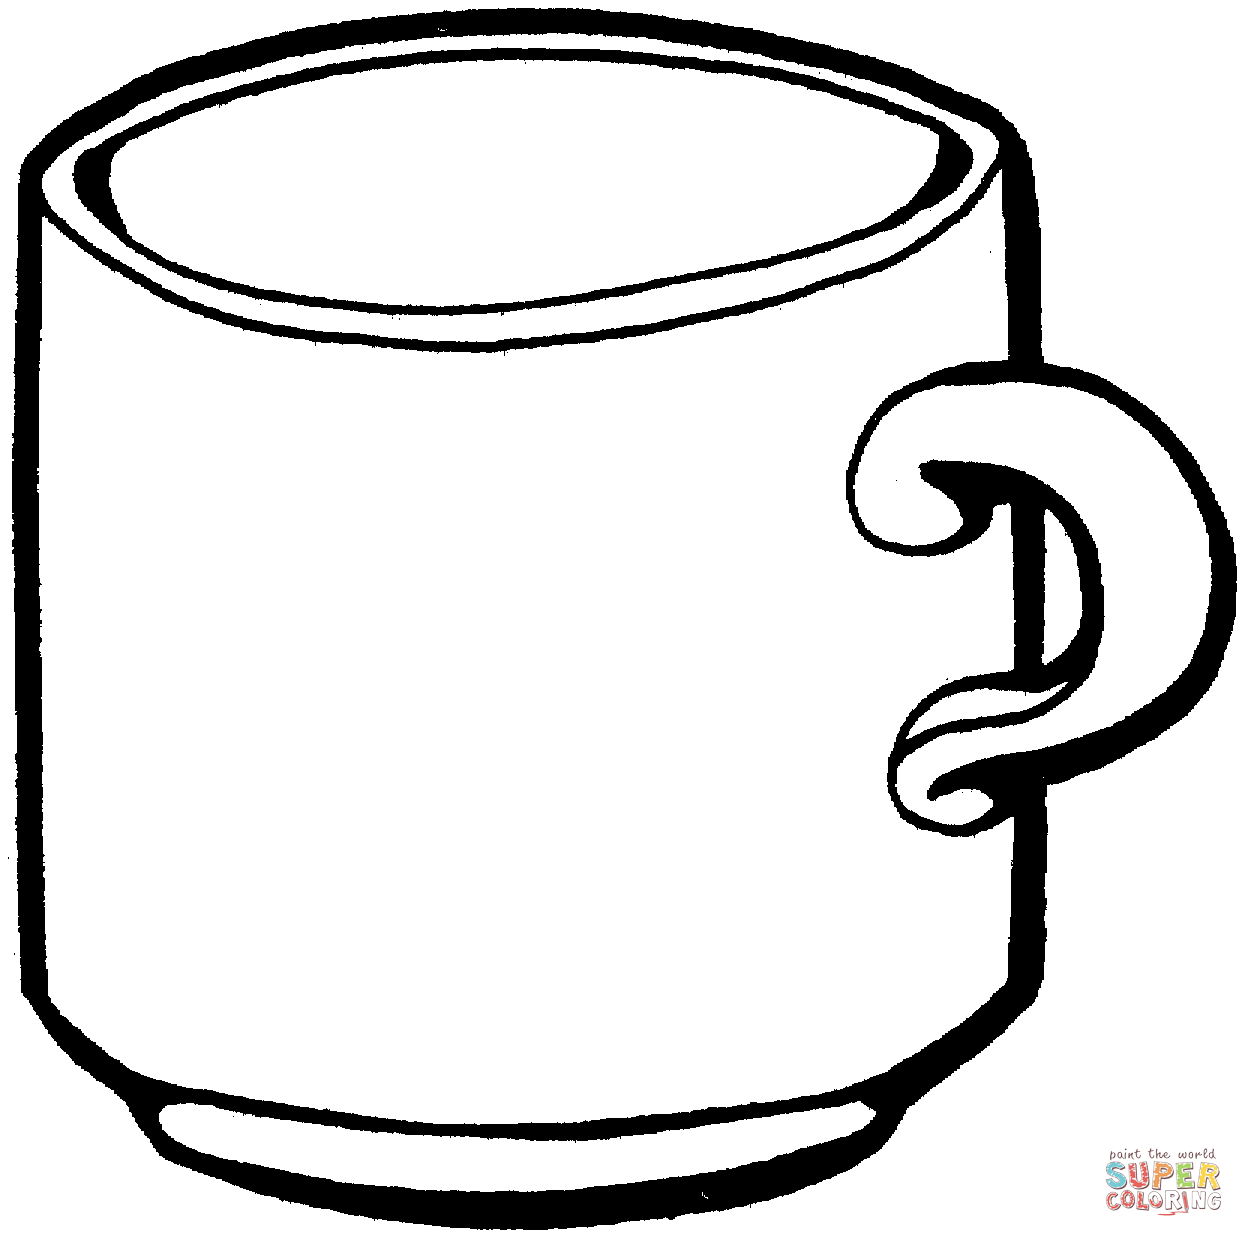 A carton and a glass of milk coloring page | Free Printable ...